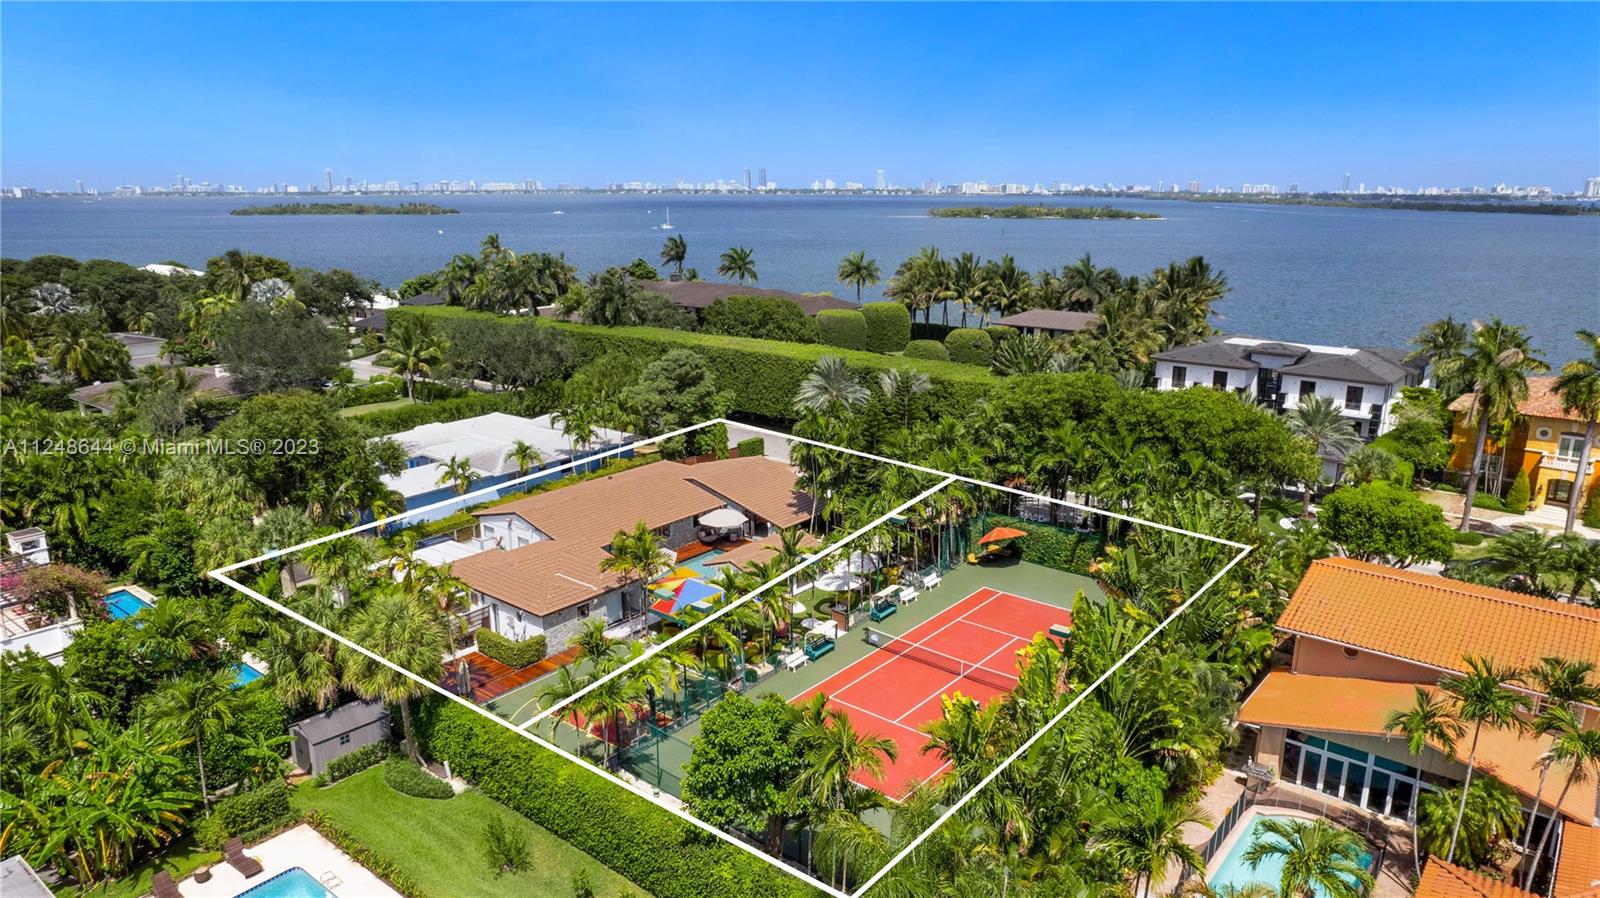 TWO LOTS! Unique opportunity to own two contiguous lot perfect to build two homes in the most premium location in the island of Bay Point.  CASA CLUB. Enjoy this tropical paradise perfect to live and entertain at the exclusive island of Bay Point, the only true gated private community in the east of Miami with the most amazing outdoor living with your private Tennis court, basketball court, mini golf, billiard room, and gym in this charming double lot, fully renovated, 5 bedroom, 4 bathroom, modern ranch home. All new: roof, impact windows, modern kitchen with stainless steel appliances.  Guest quarter with morning bar and gym. Just 10 min from Miami Beach and MIA. Next to Design District, Midtown, Wynwood.